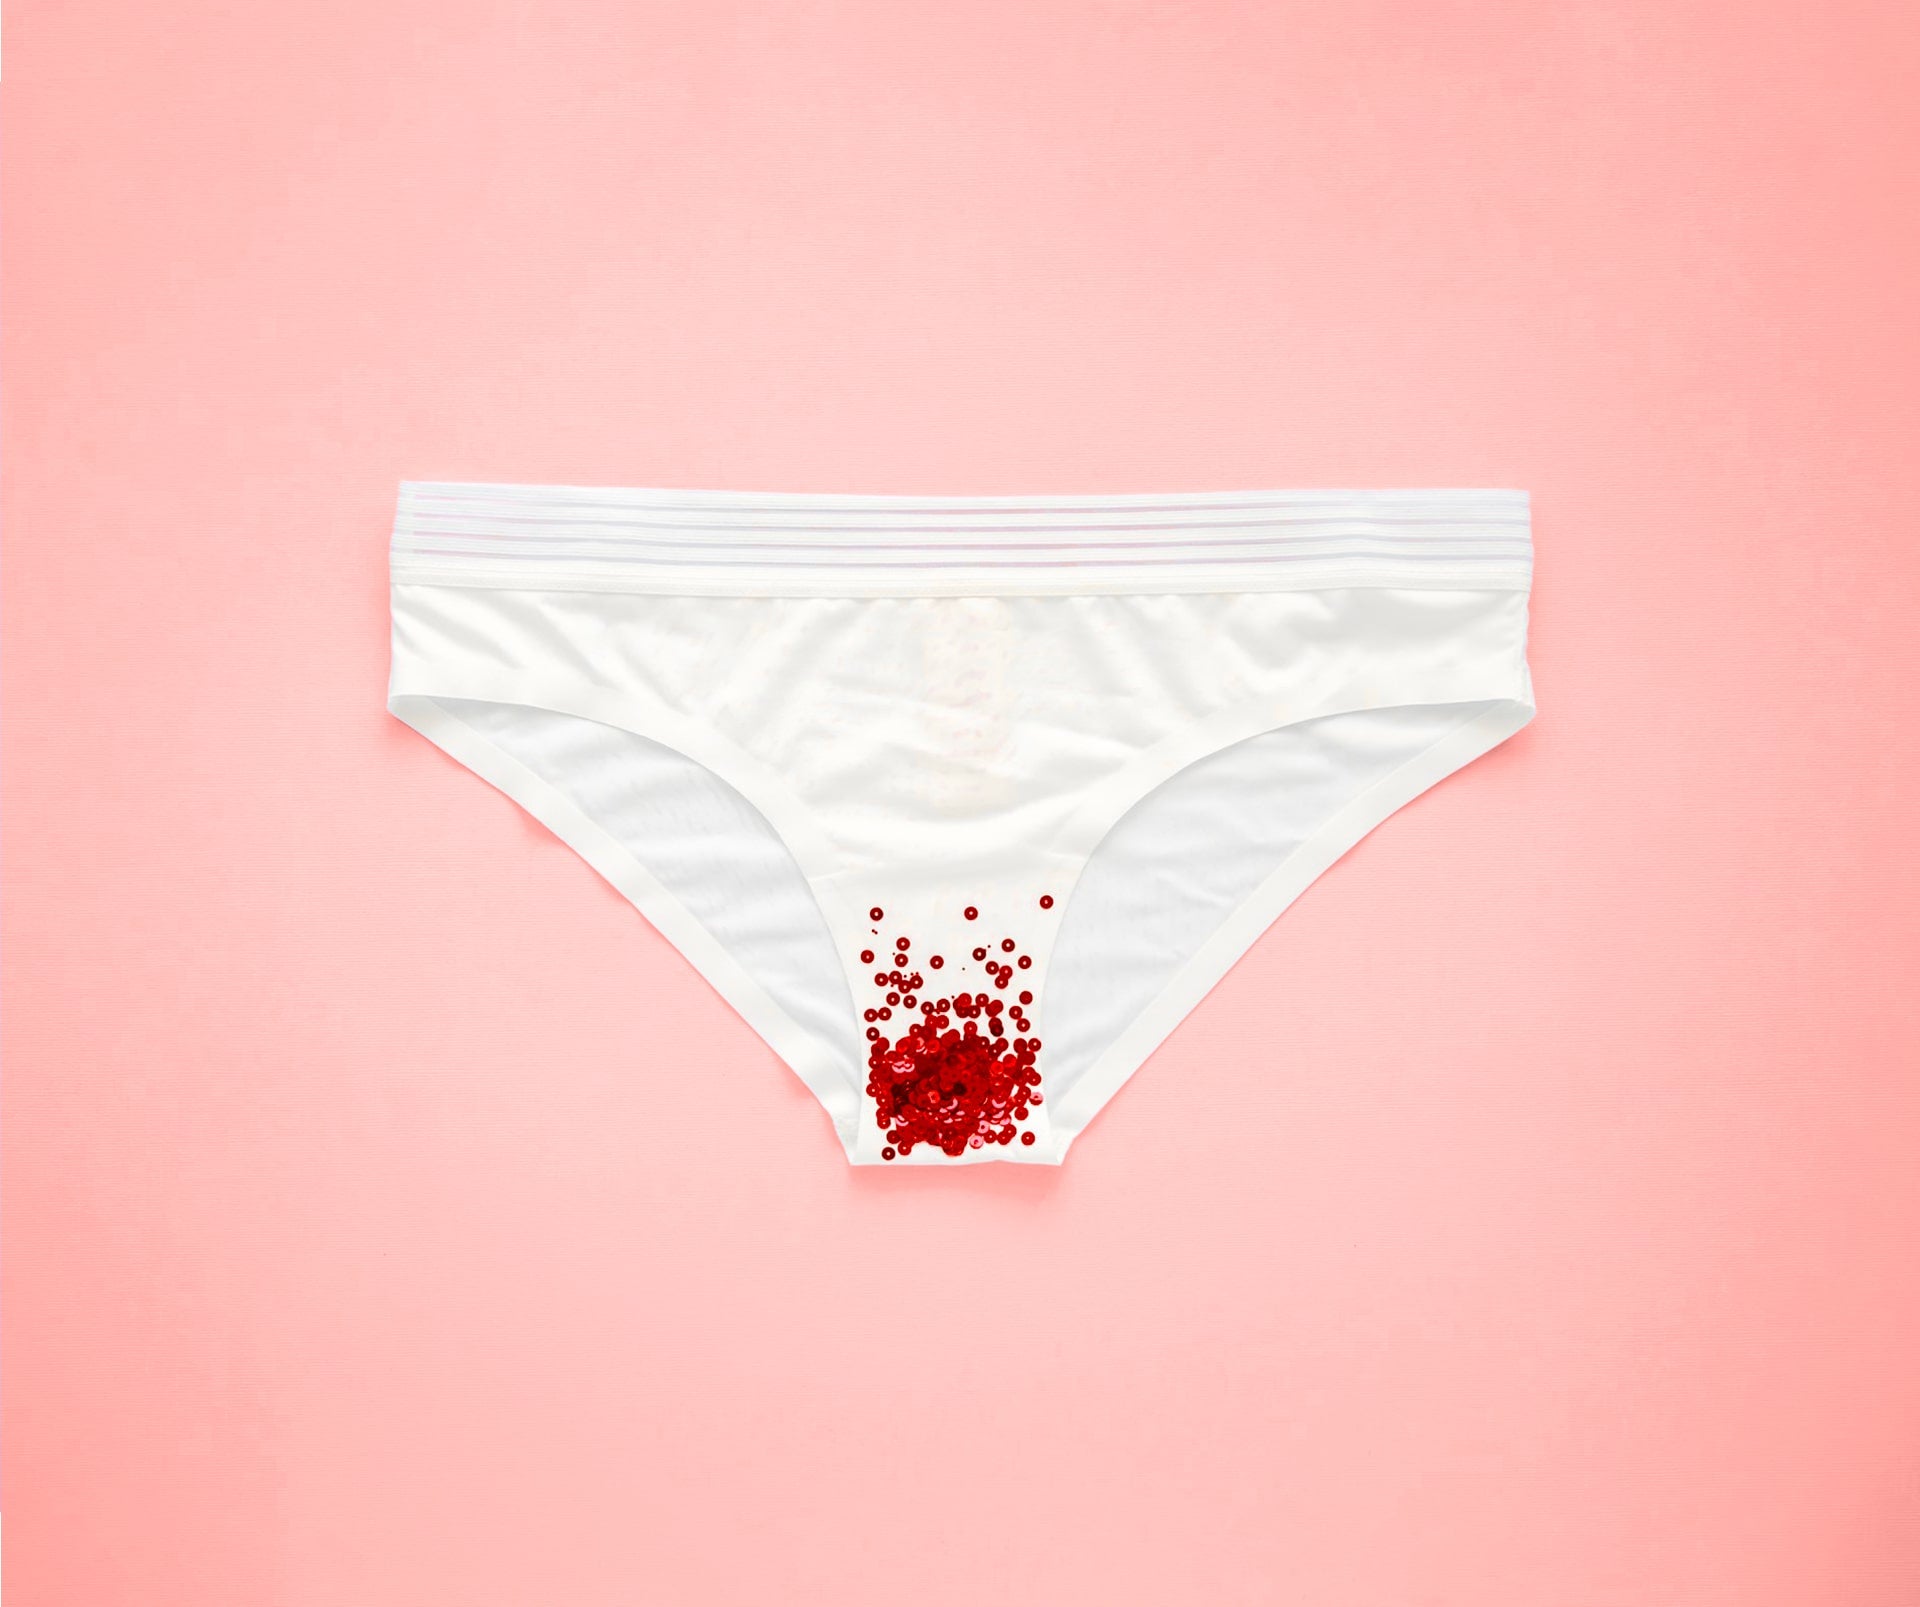 The composition of menstrual blood is an incredible resource!